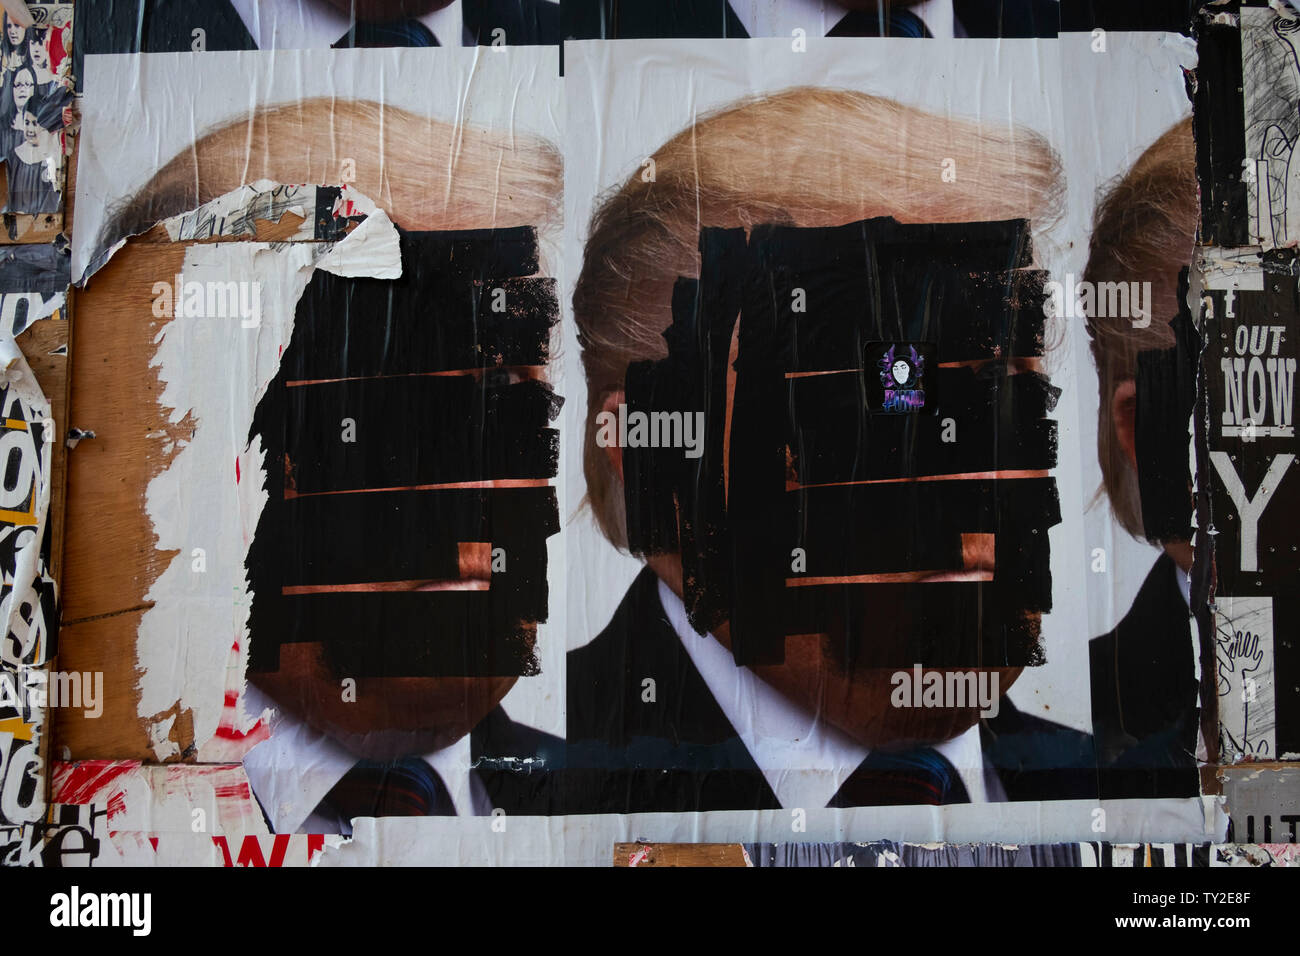 Donald Trump image defaced. Hollywood Boulevard, Hollywood, Los Angeles, California, United States of America Stock Photo